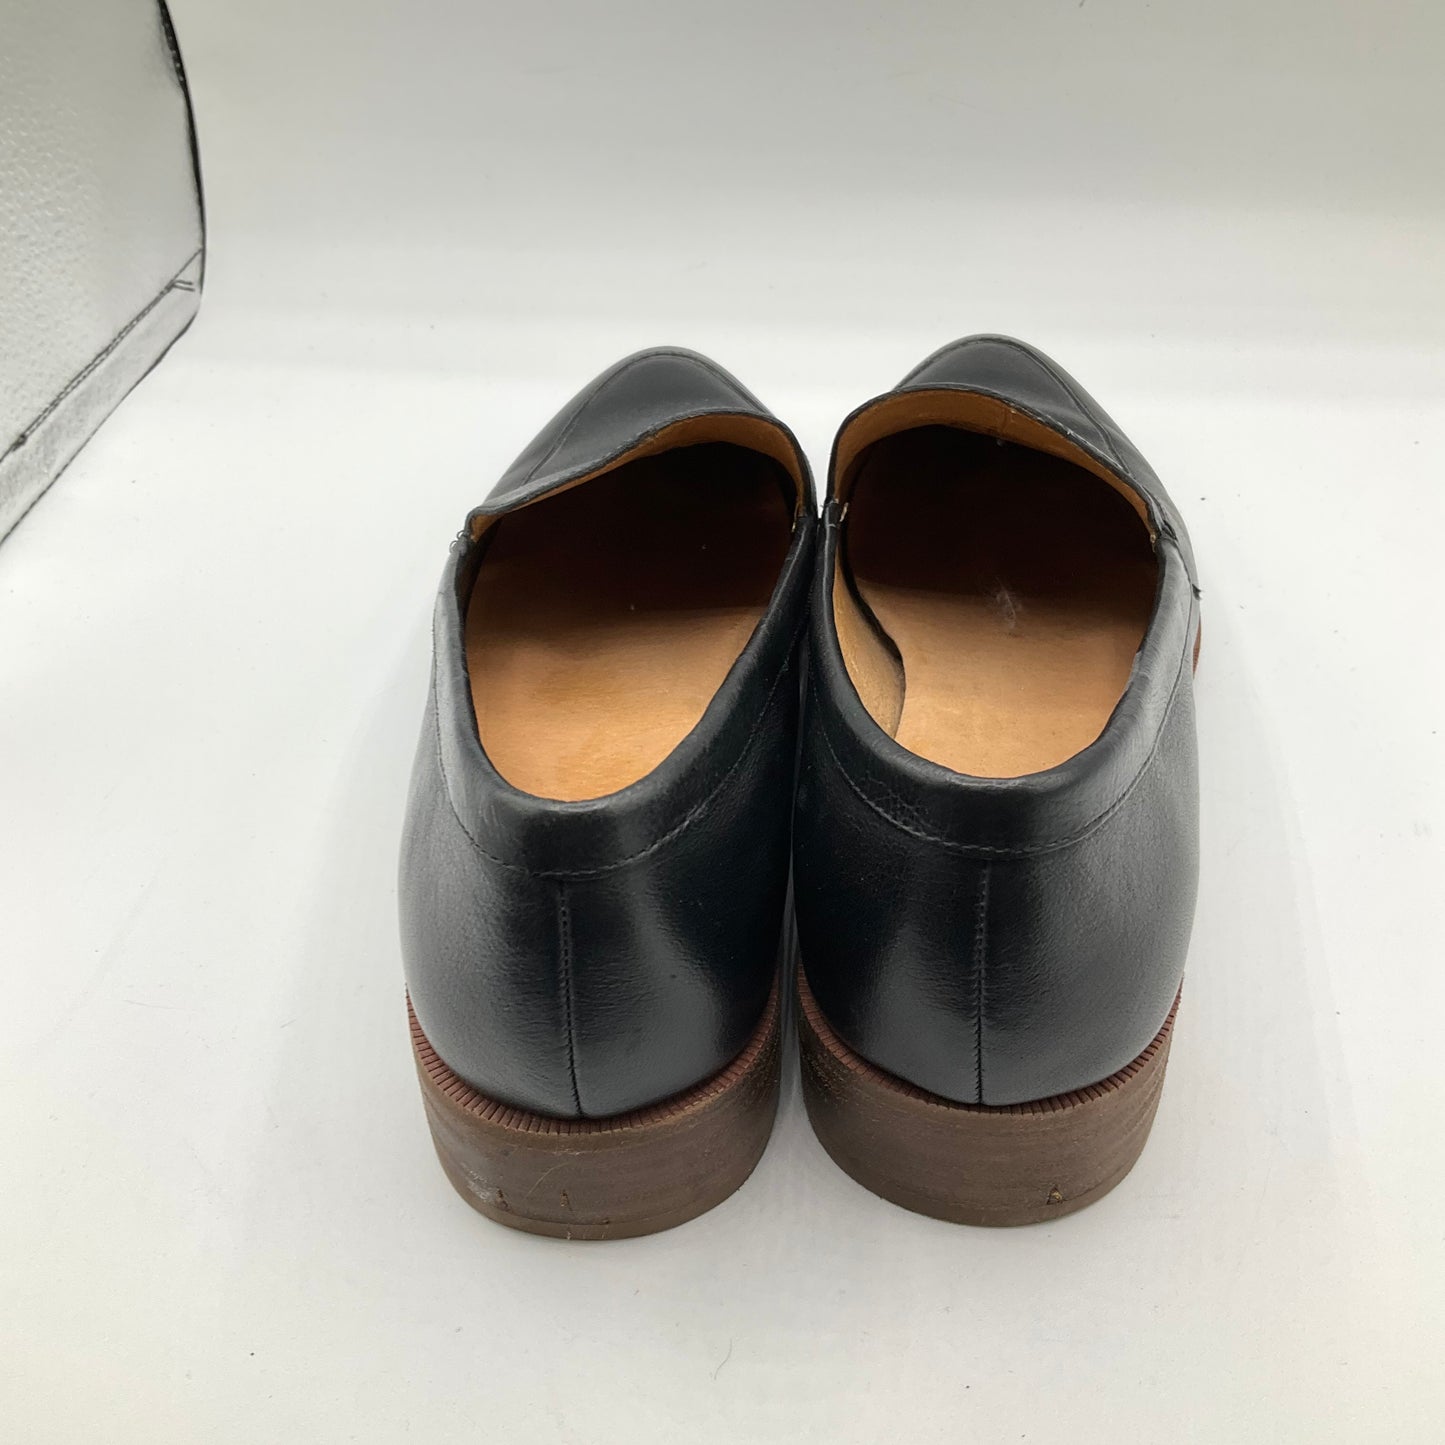 Shoes Flats Loafer Oxford By Madewell  Size: 8.5